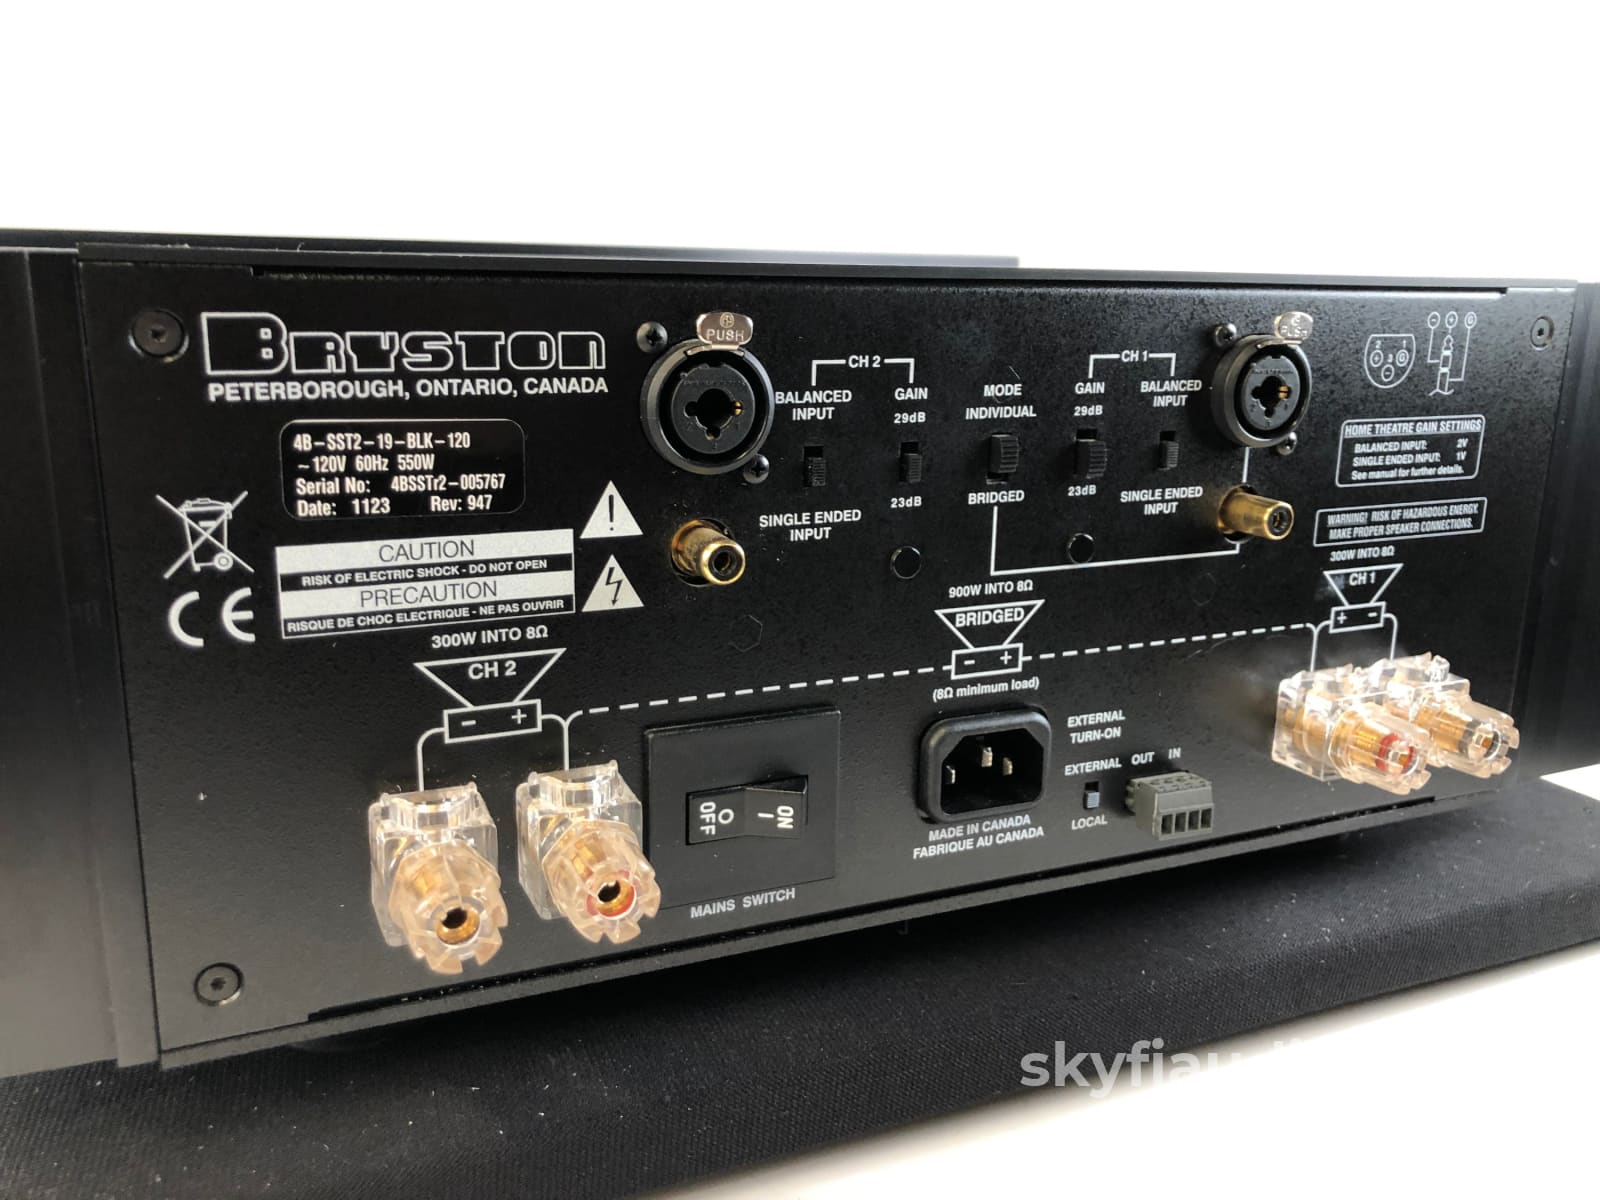 Bryston 4B-Sst2 Amplifier - Barely Used And Complete